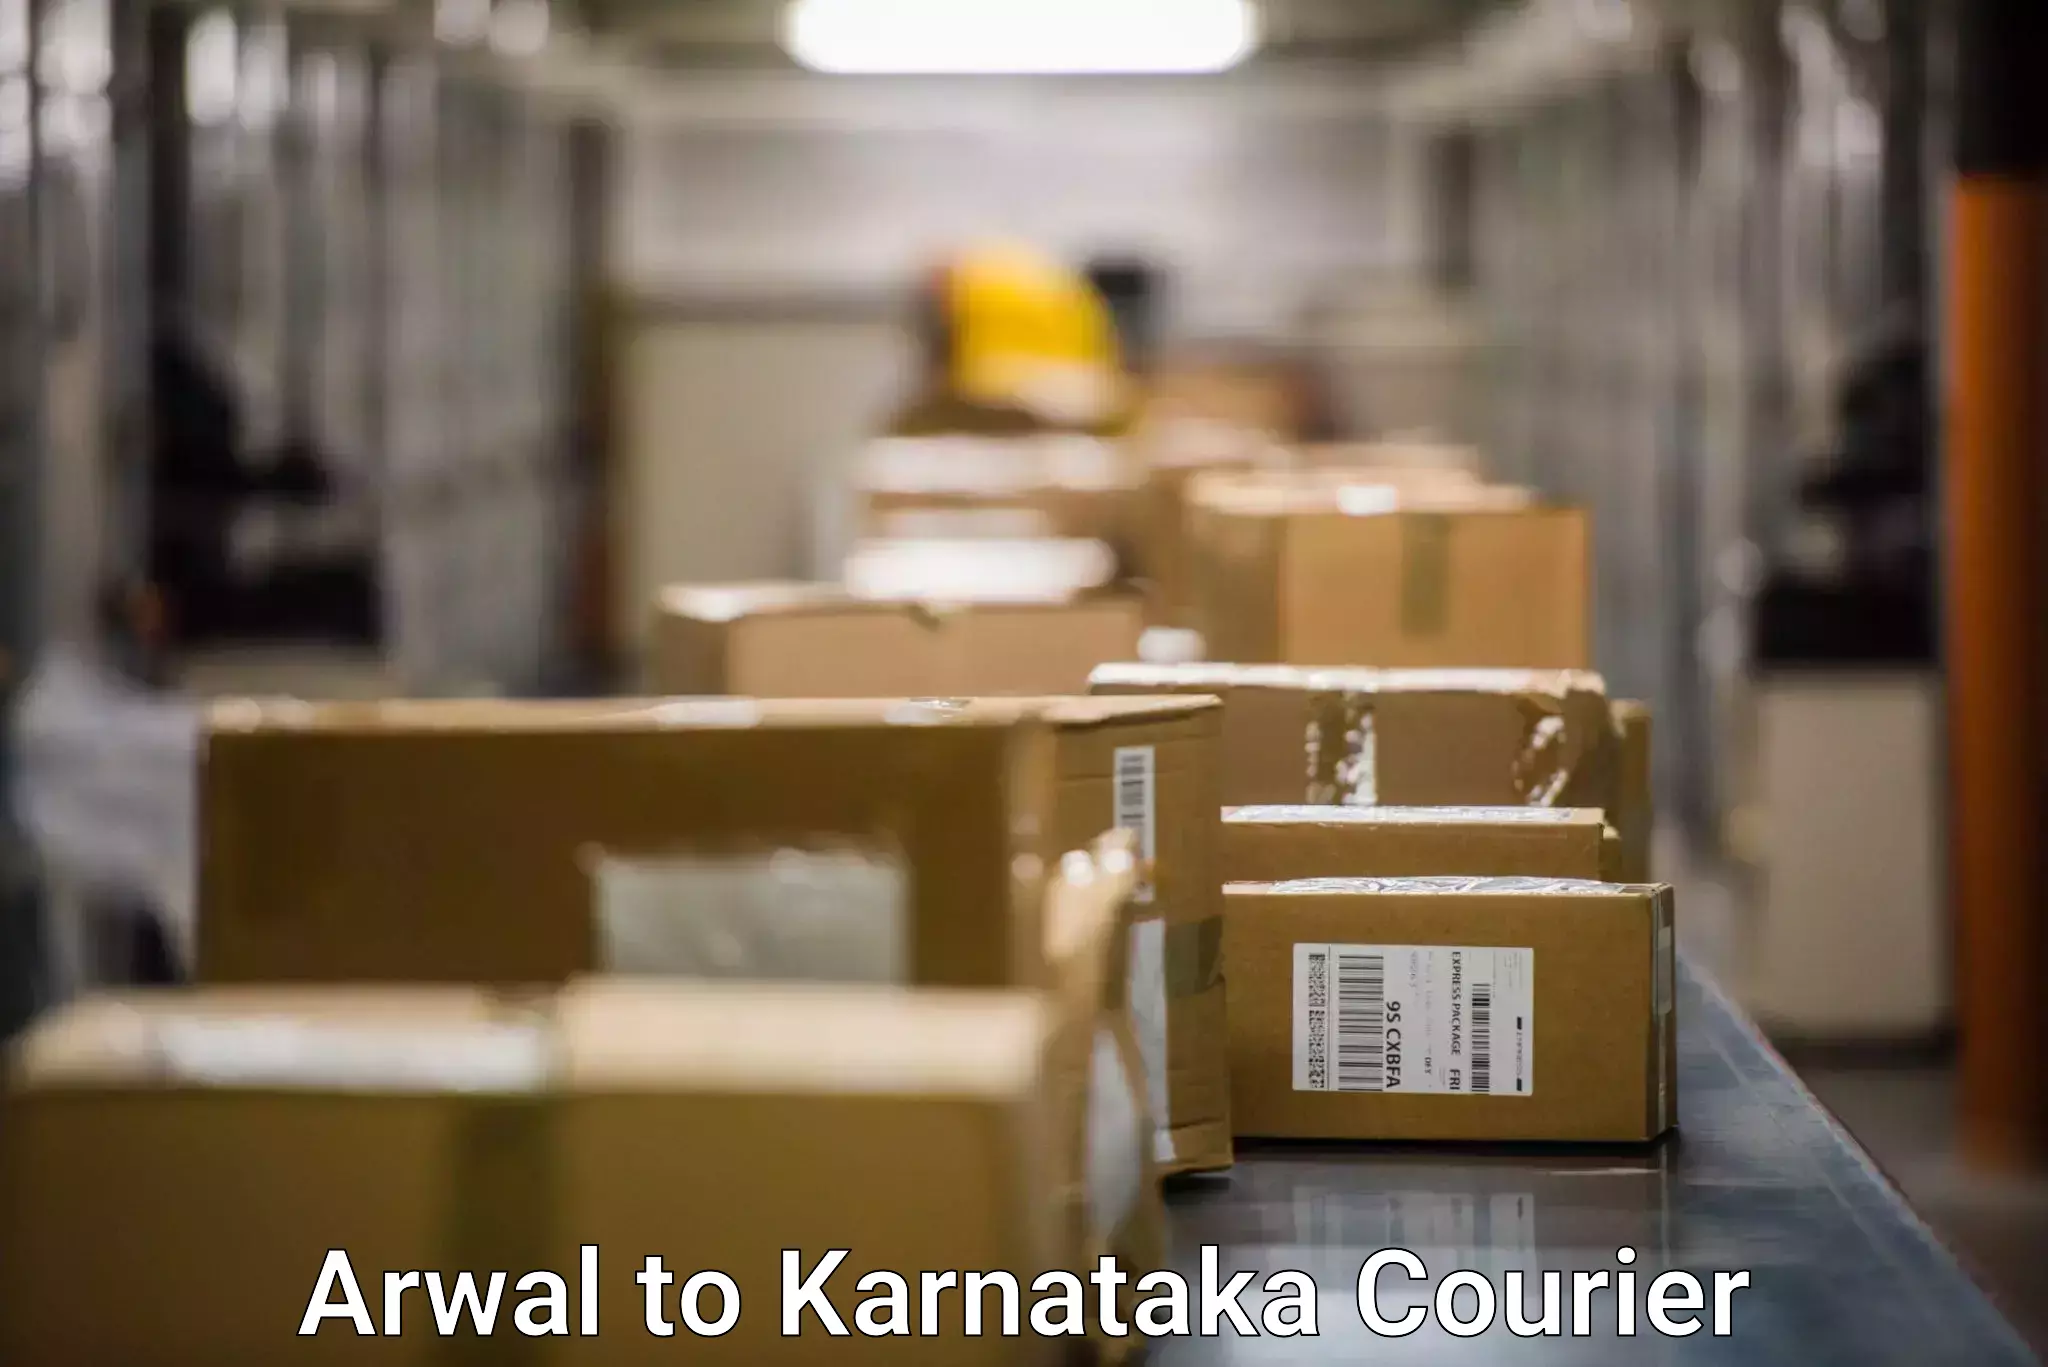 Package delivery network Arwal to Bangalore